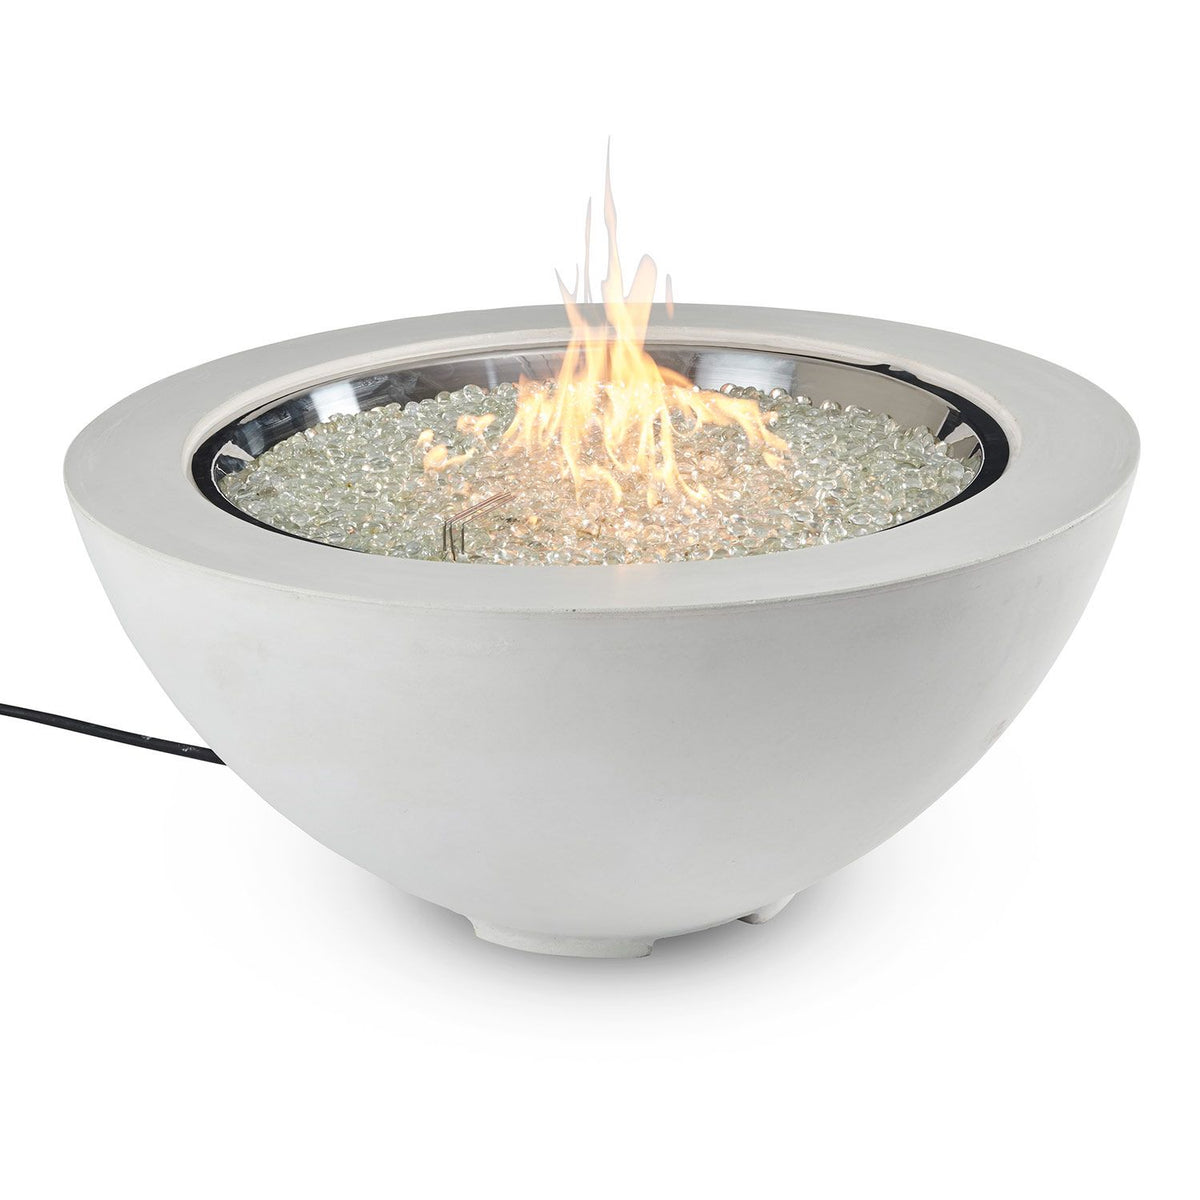 The Outdoor Greatroom Natural Grey Cove 30 Fire Bowl